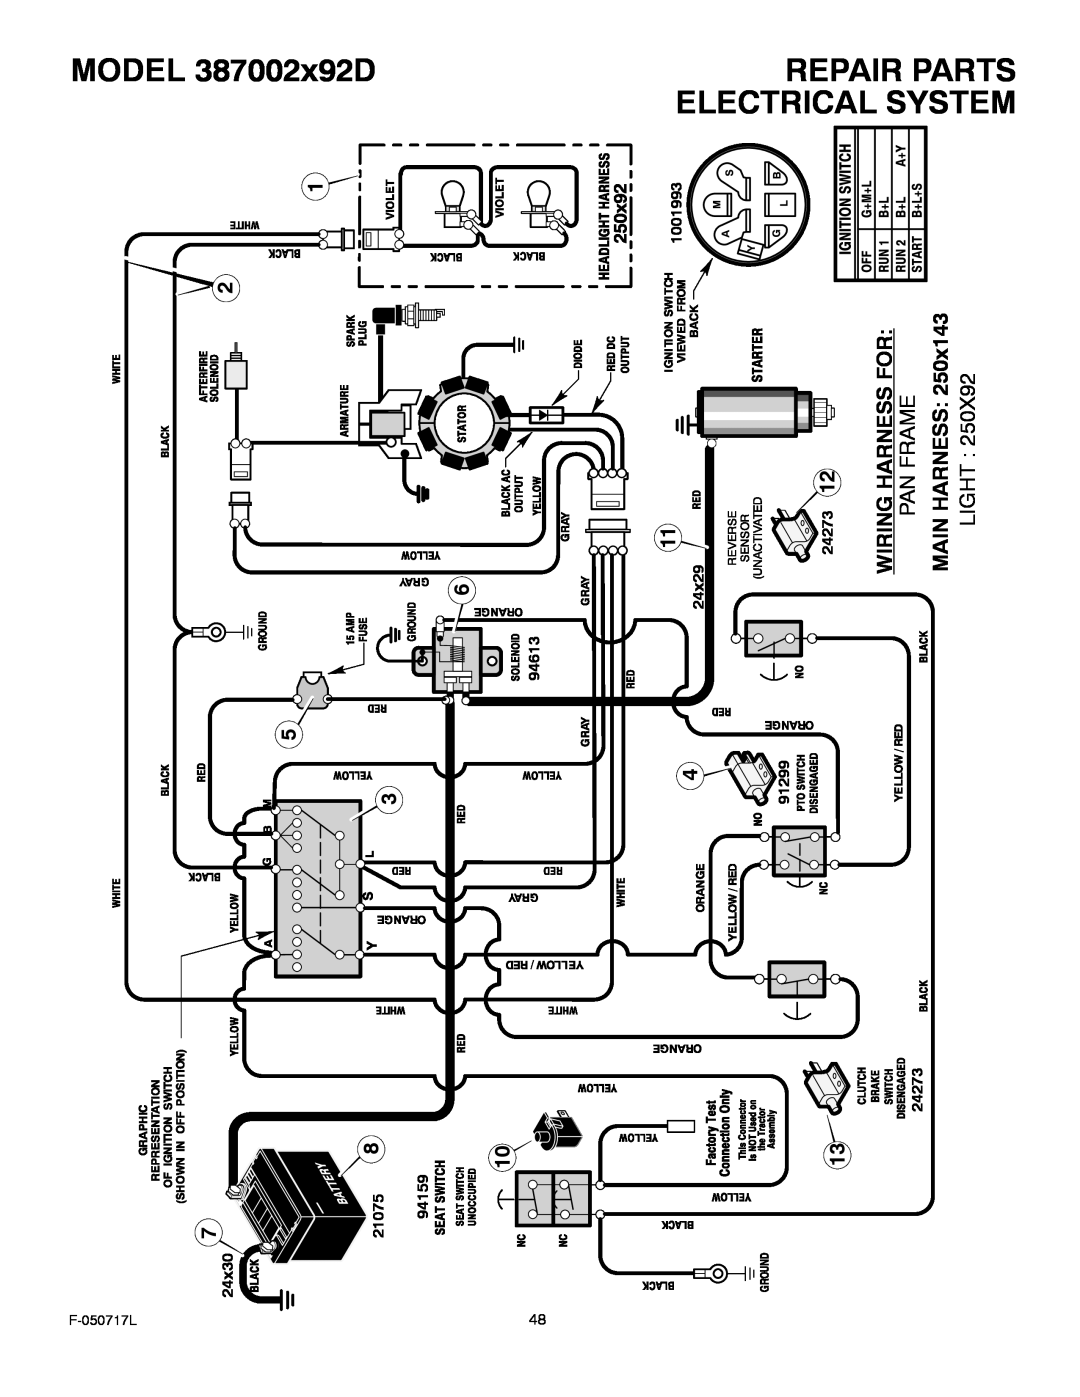 Murray manual MODEL 387002x92D, Wiring Harness For, Main Harness, Electrical System, Repair Parts 